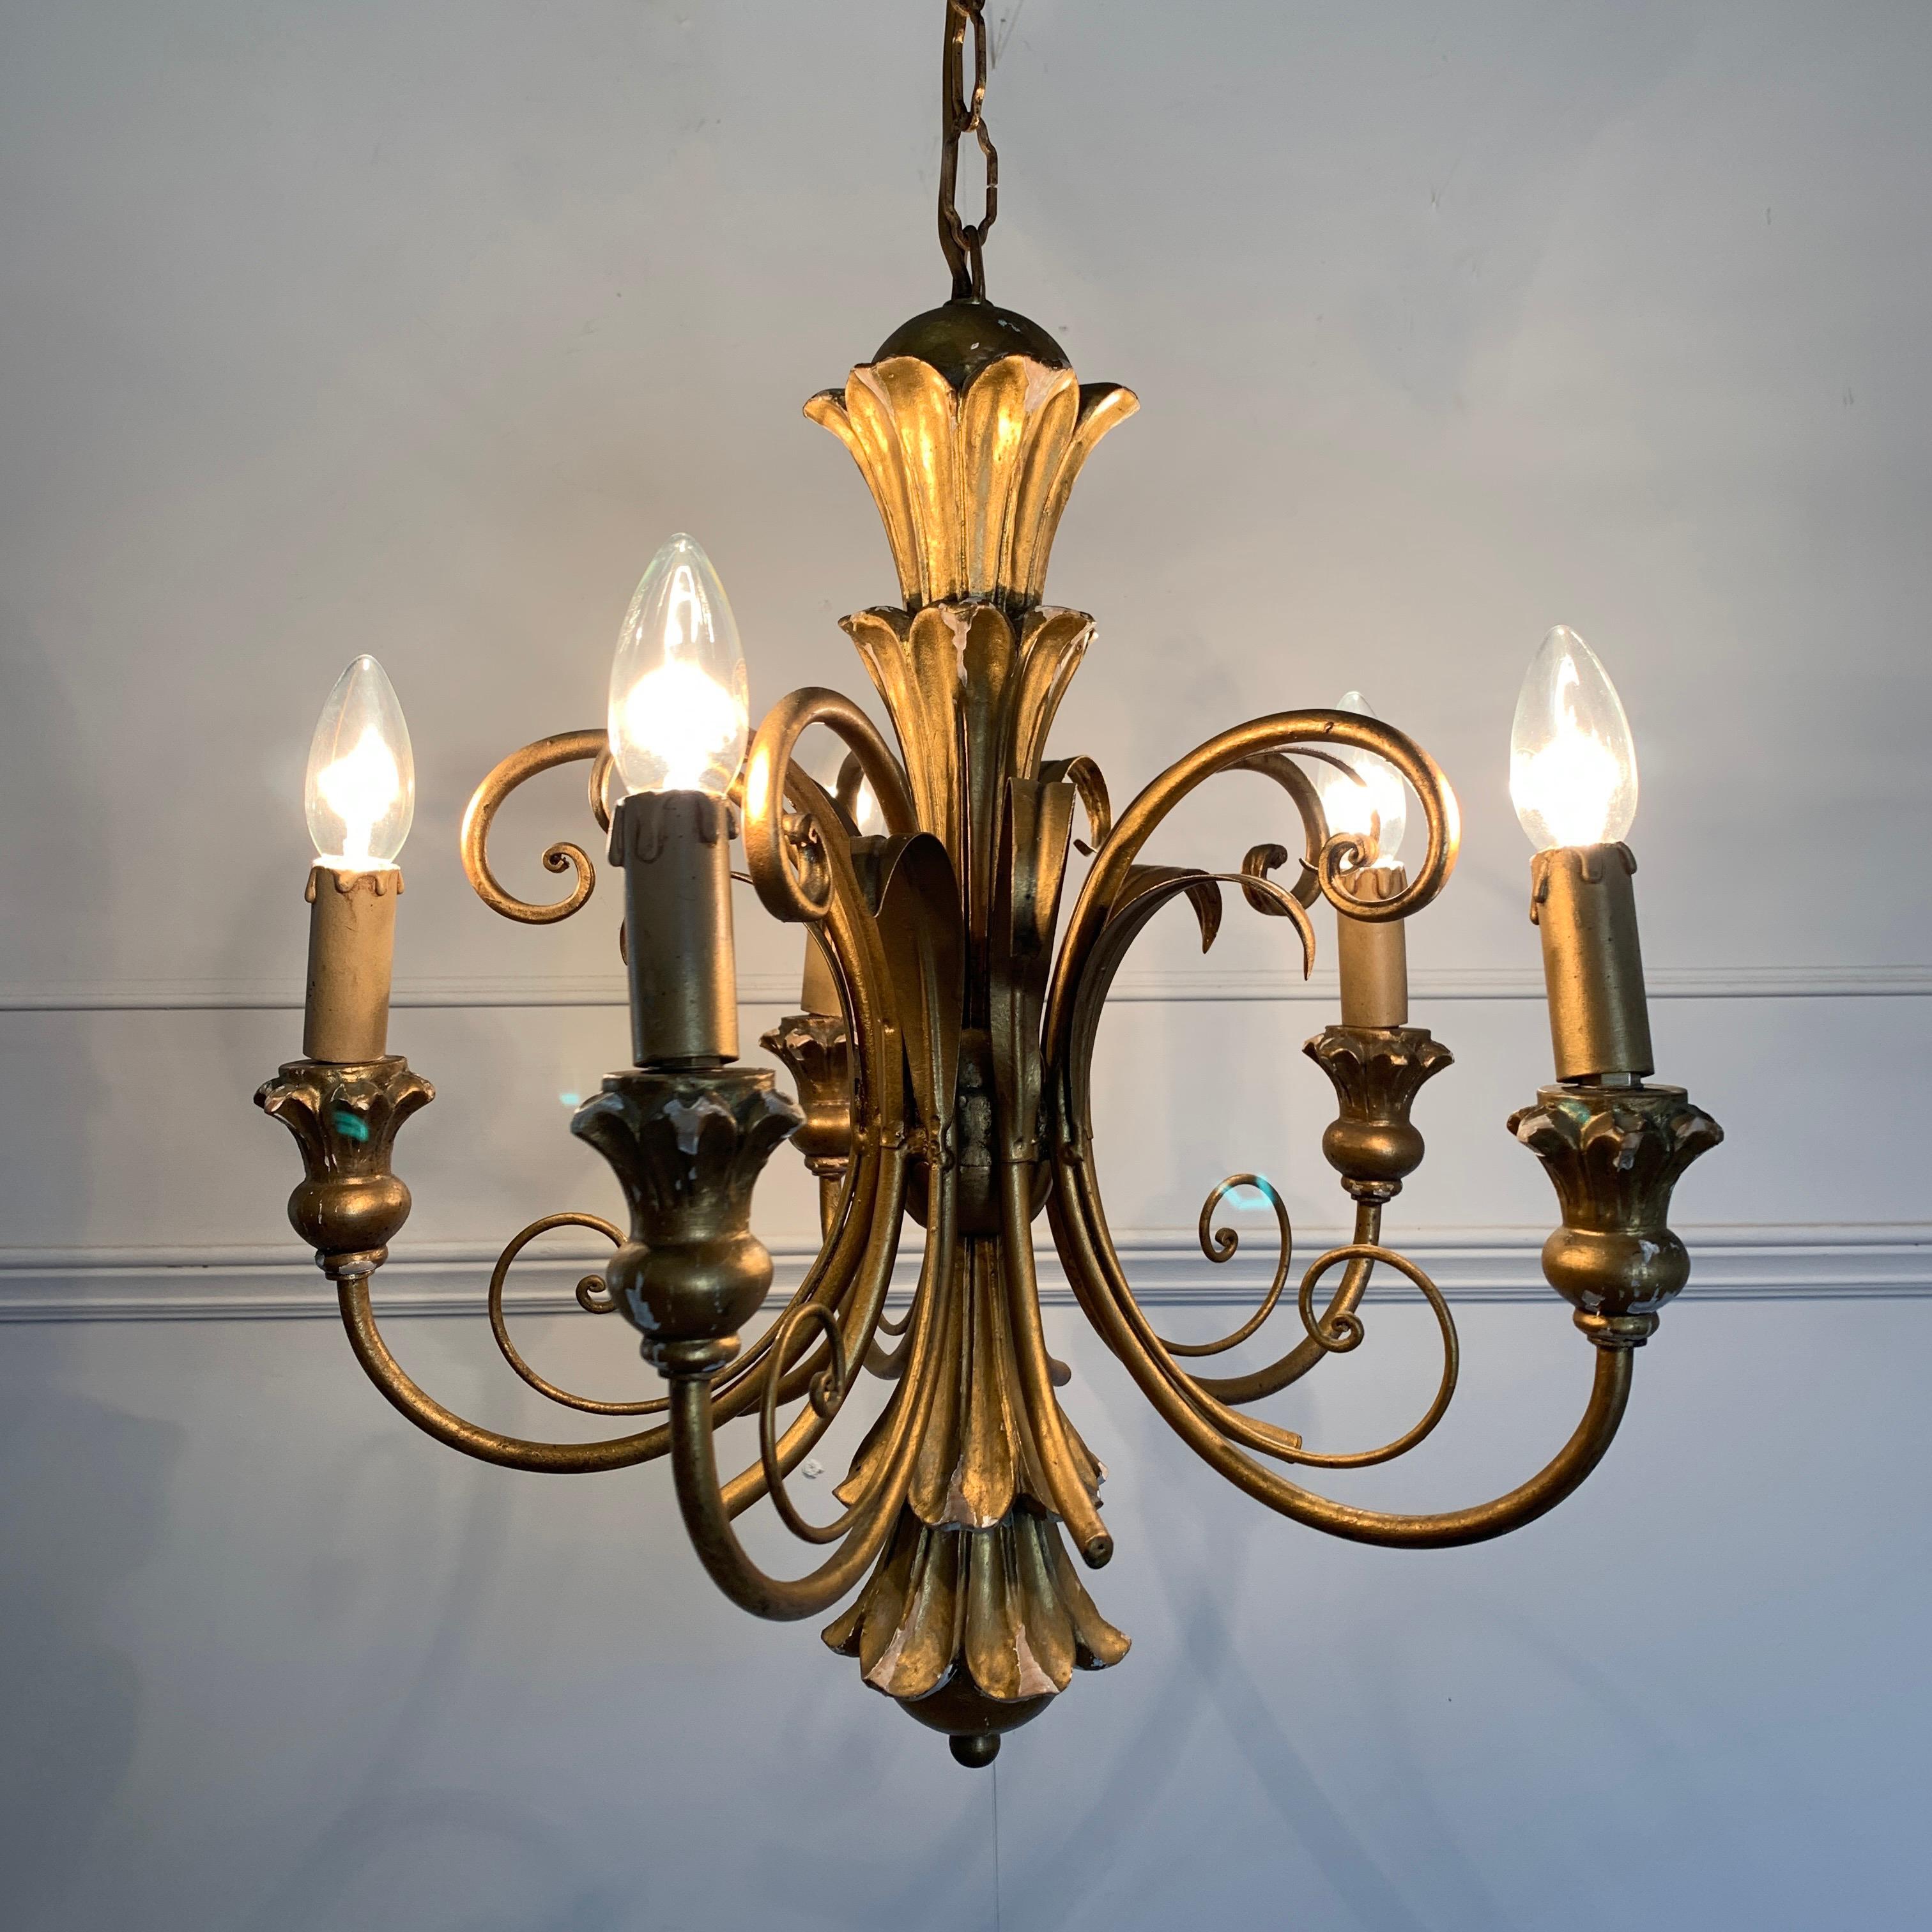 Italian giltwood scroll chandelier, circa 1960s
The carved wooden central finial is decorated with its gesso and gilt finish
Scroll wirework tendrils and metal arms reach out to the wooden lamp holders
There are 5 bulb holders, E14 small screw in